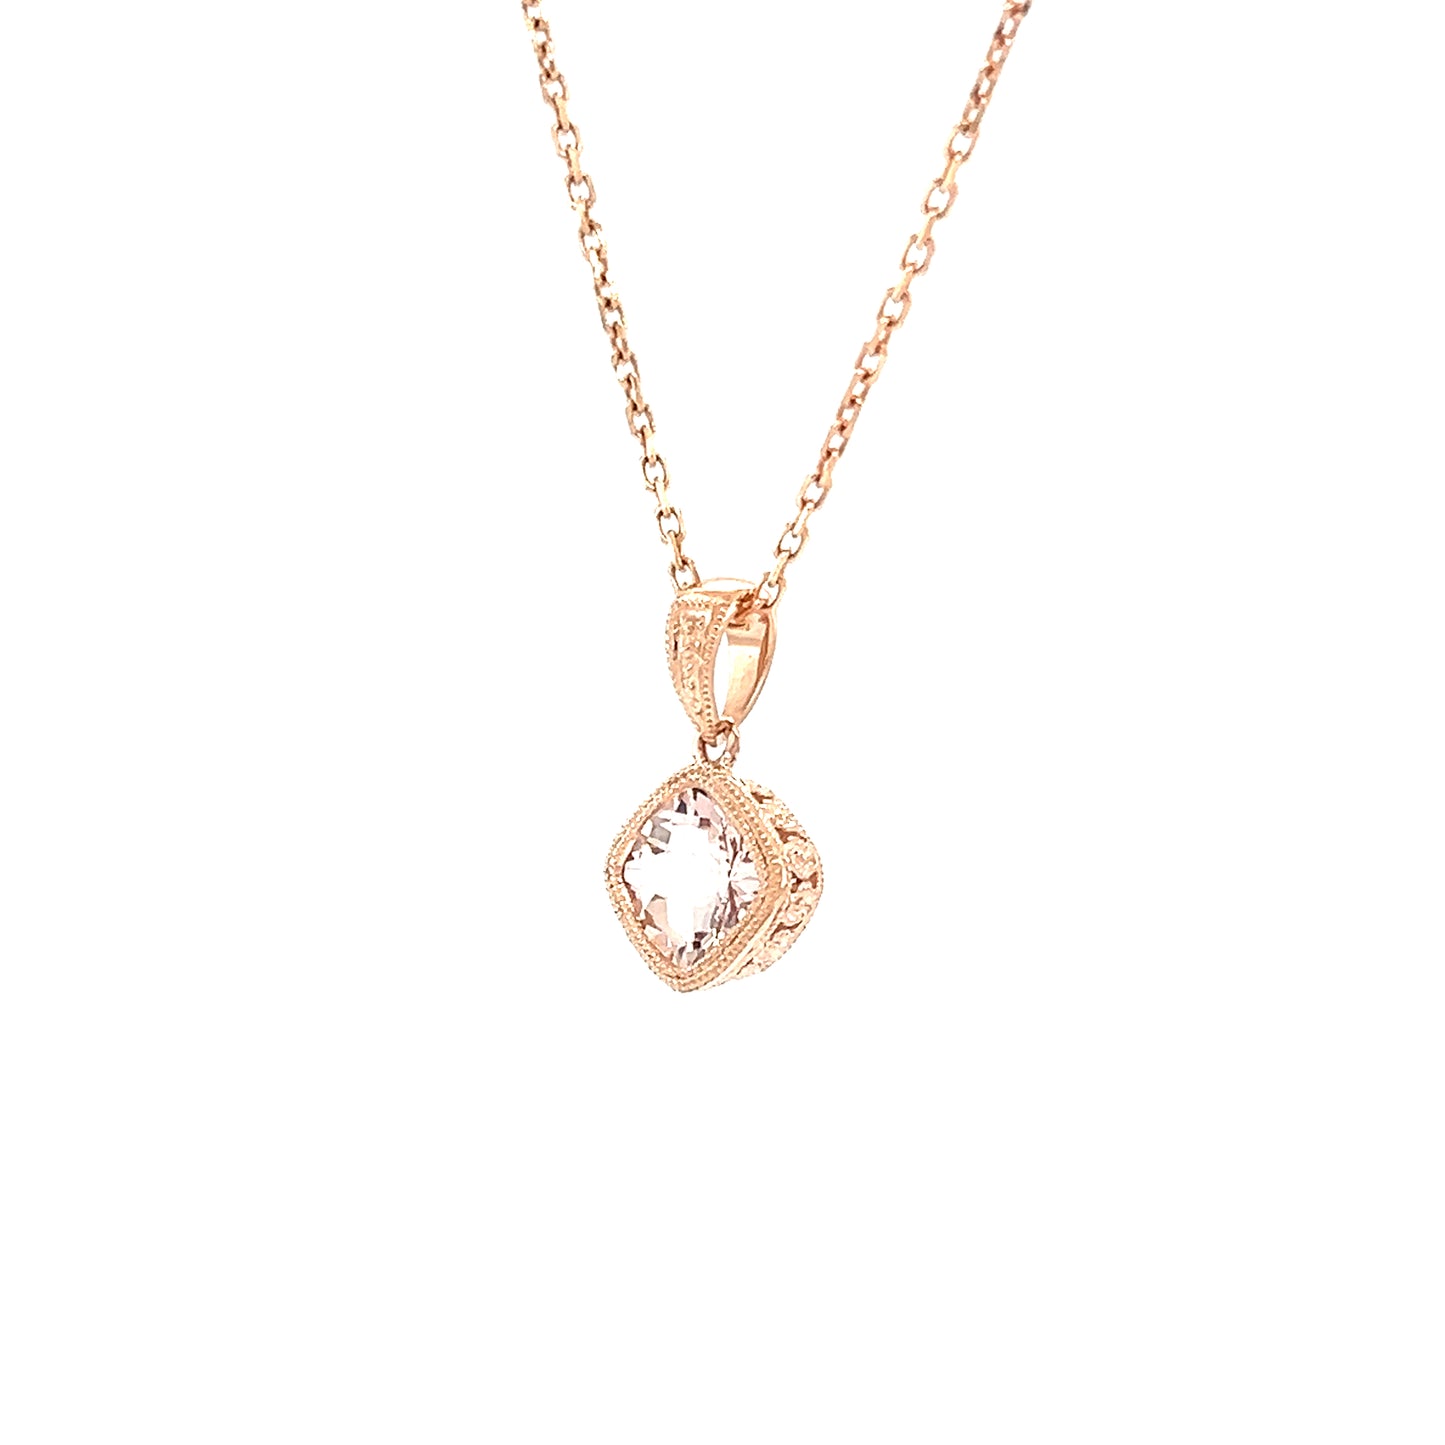 Cushion Morganite Pendant with Filigree and Milgrain Details in 14K Rose Gold Right Side View